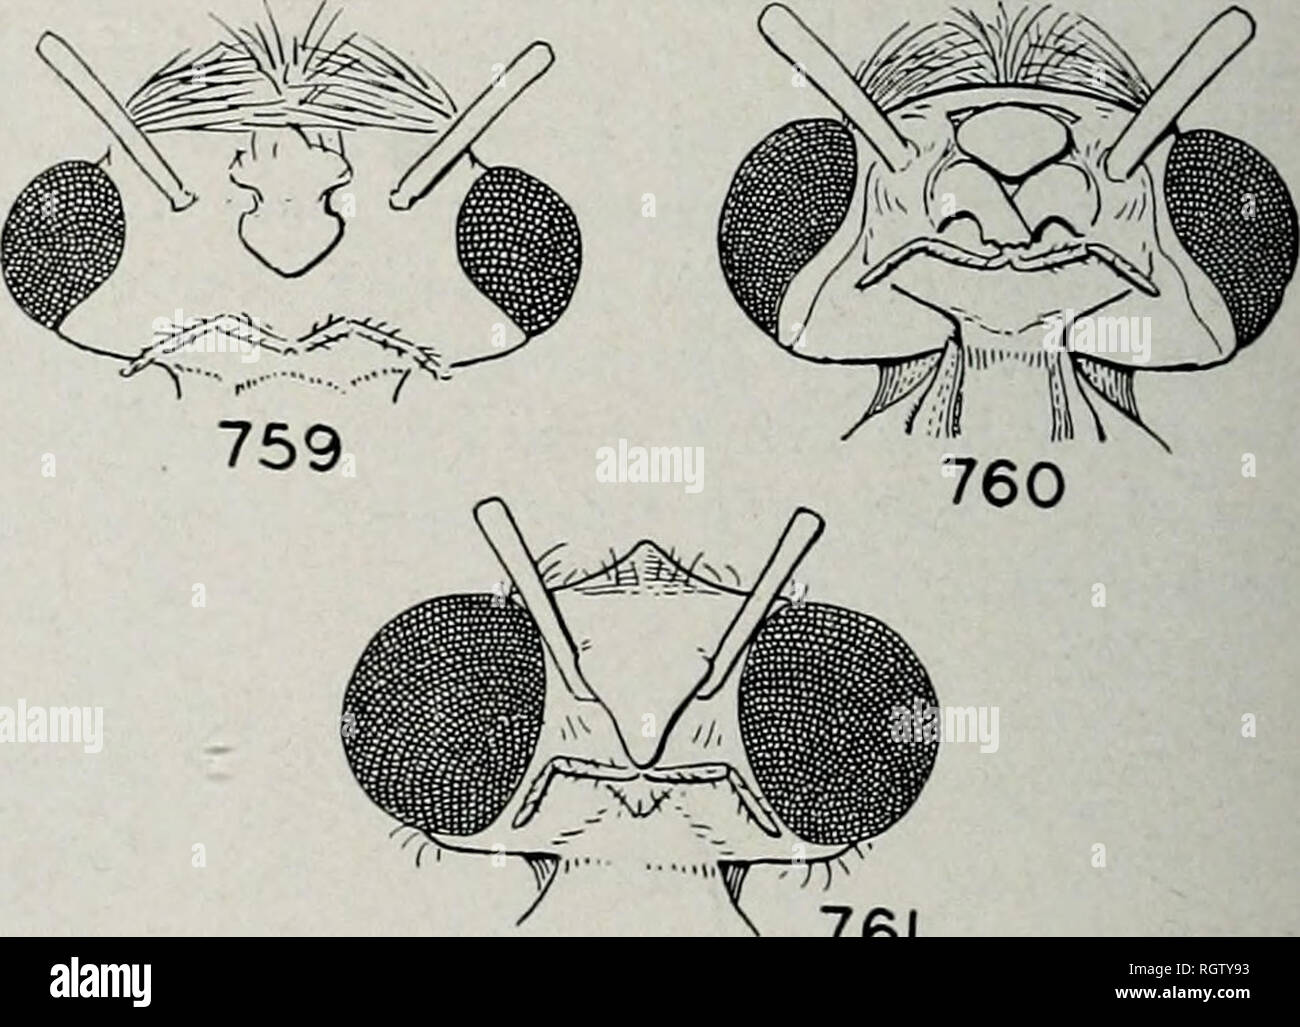 . Bulletin. Natural history; Natural history. Fig. 756.—Leptocella pavida, wing pattern. Claspers with basal portion produced into a wide flap, fig. 752 5 4. Wings with transverse yellowish bars in the membrane, fig. 755 exquisita, p. 217 Wings without transverse yellowish bars in the membrane, fig. 757. . Candida, p. 217 5. Ventral aspect of head with eye width equal to distance between eyes, fig. 761 spiloma, p. 219 Ventral aspect of head with eye width less than distance between eyes, figs. 759,760 6 6. Wings in repose forming a distinct dorsal pattern of V-marks, as in fig. 754 diarina, p. Stock Photo